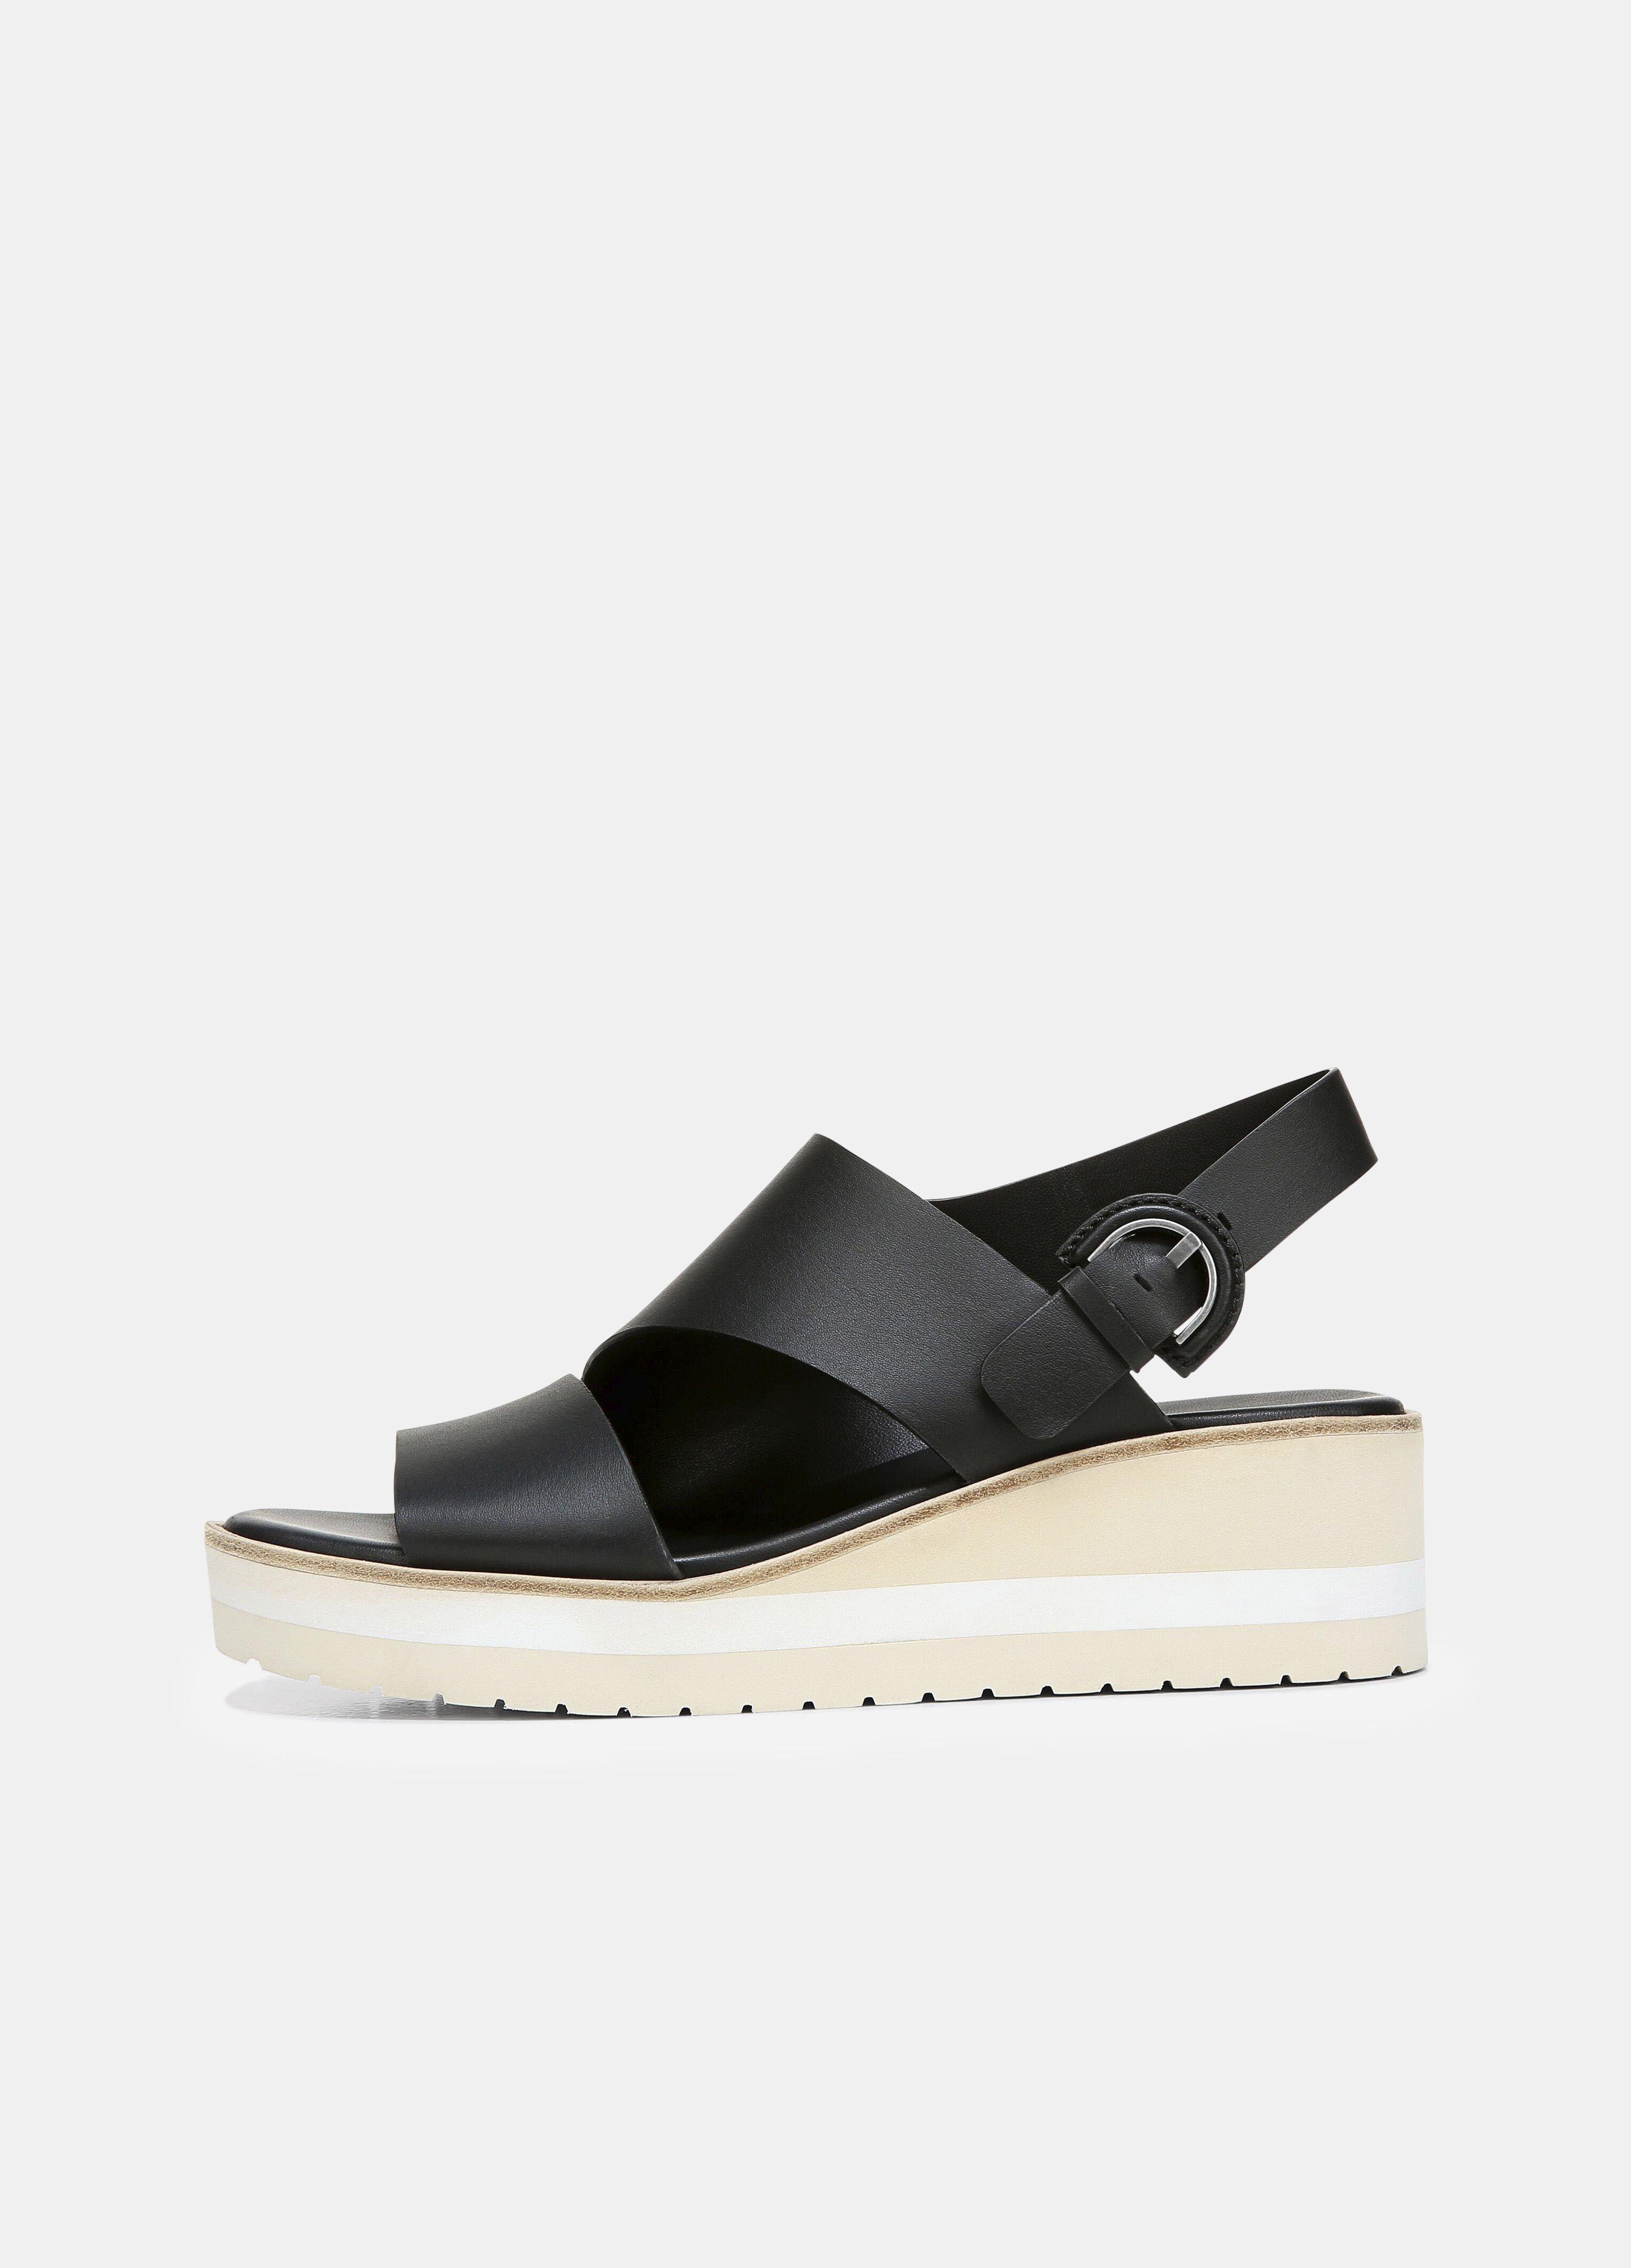 Leather Shelby Wedge Sandal for Women | Vince